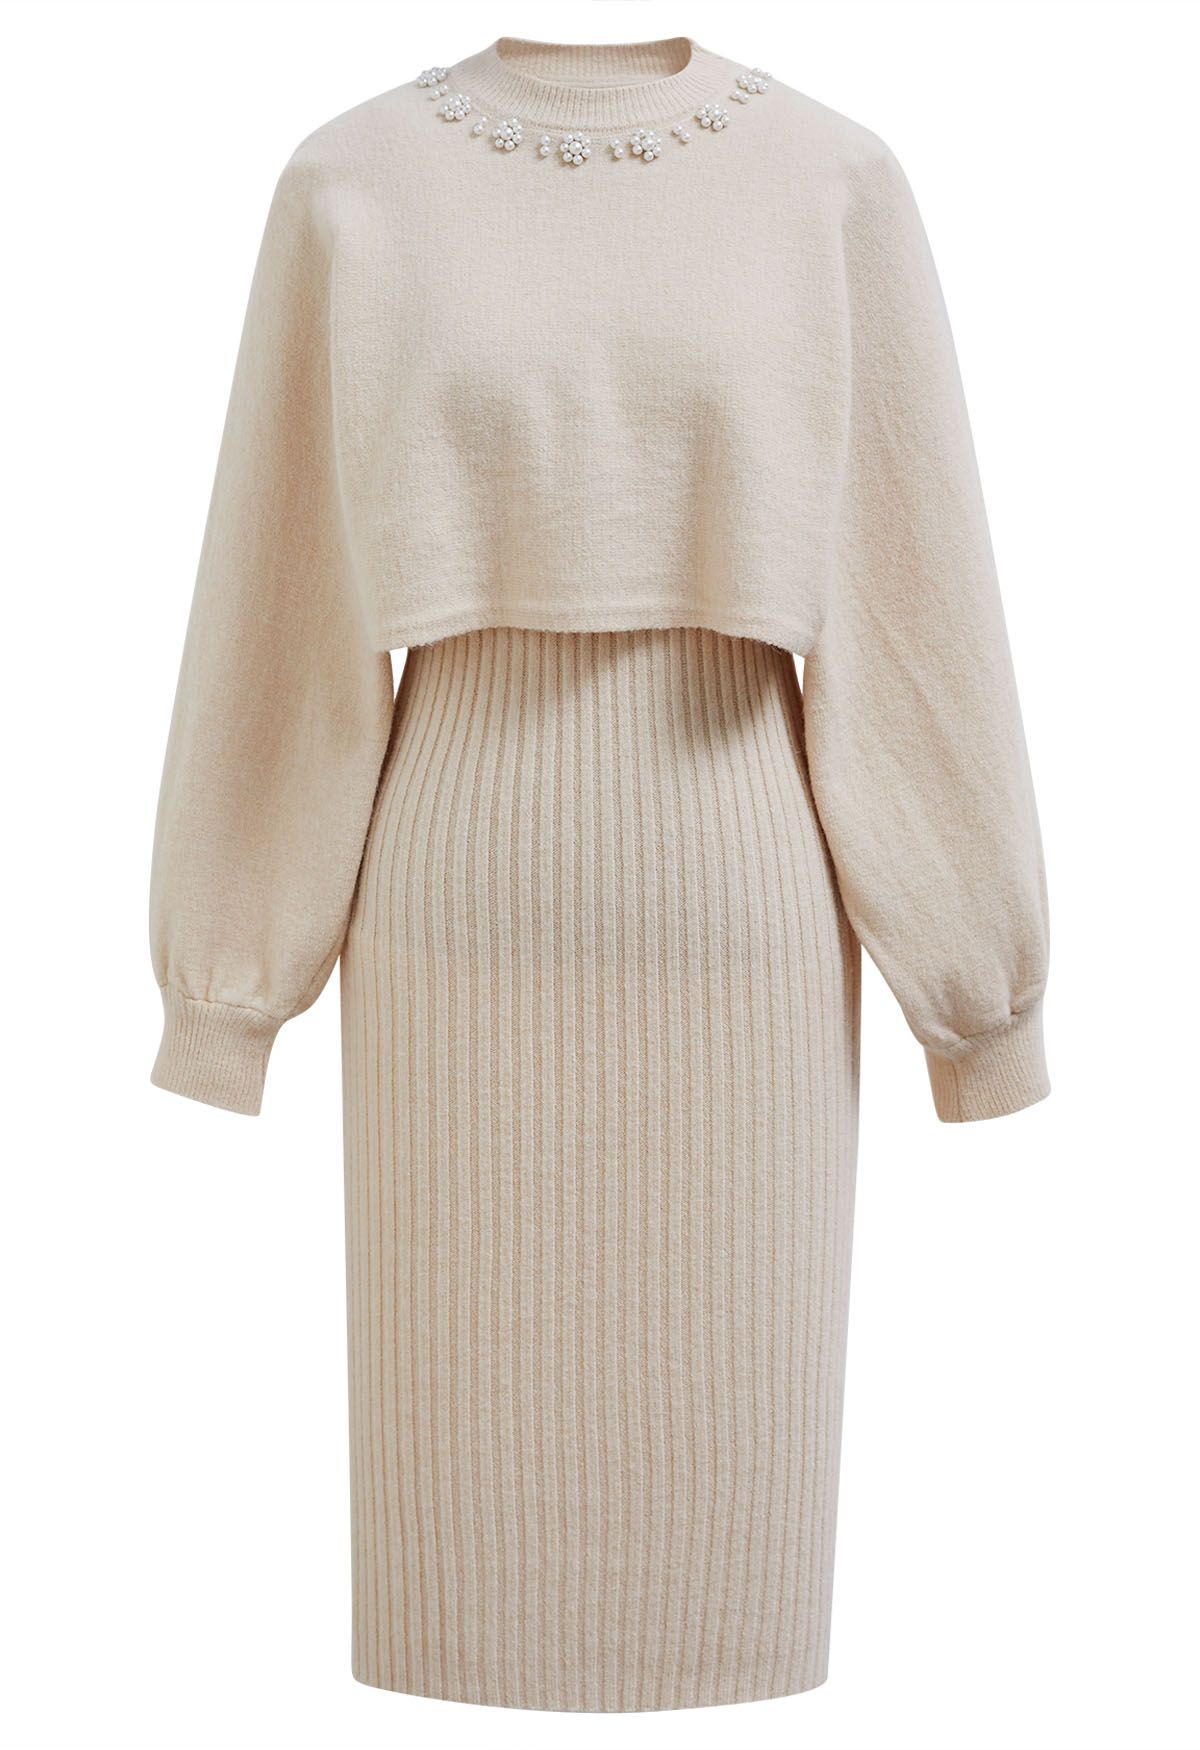 Pearl Neckline Ribbed Knit Twinset Dress in Sand